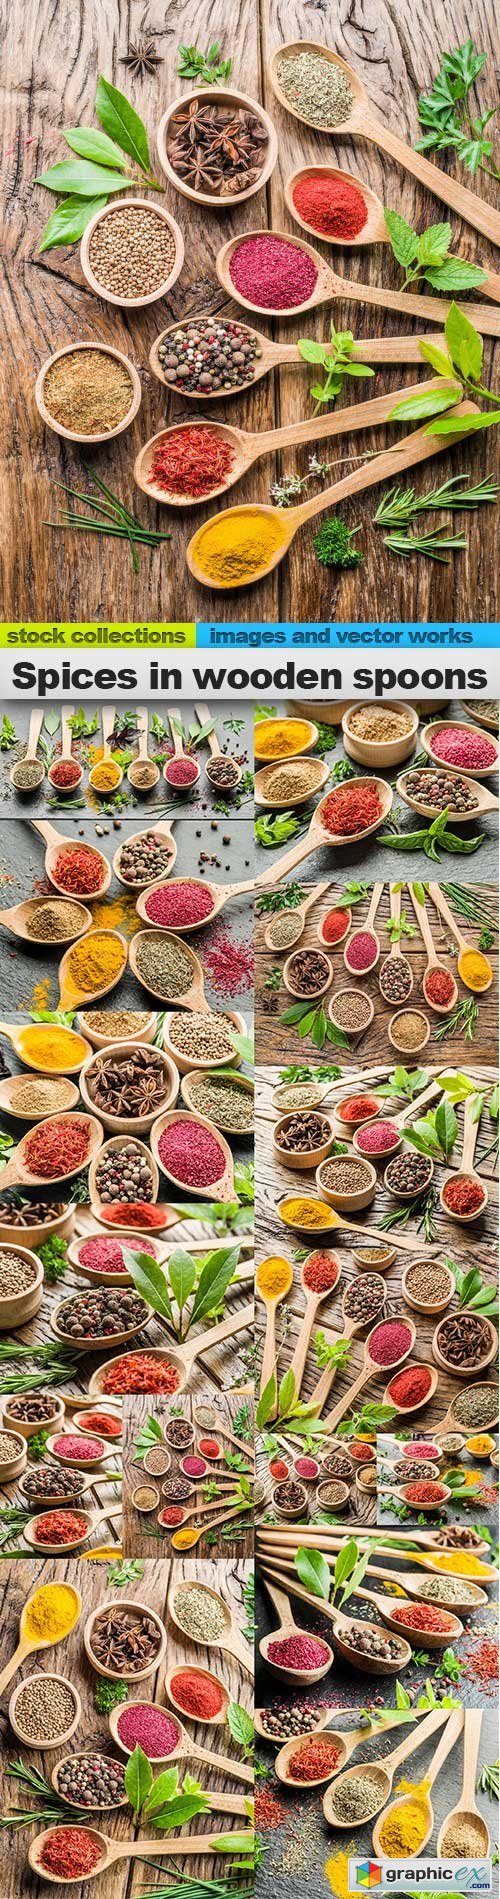 Spices in wooden spoons, 15 x UHQ JPEG